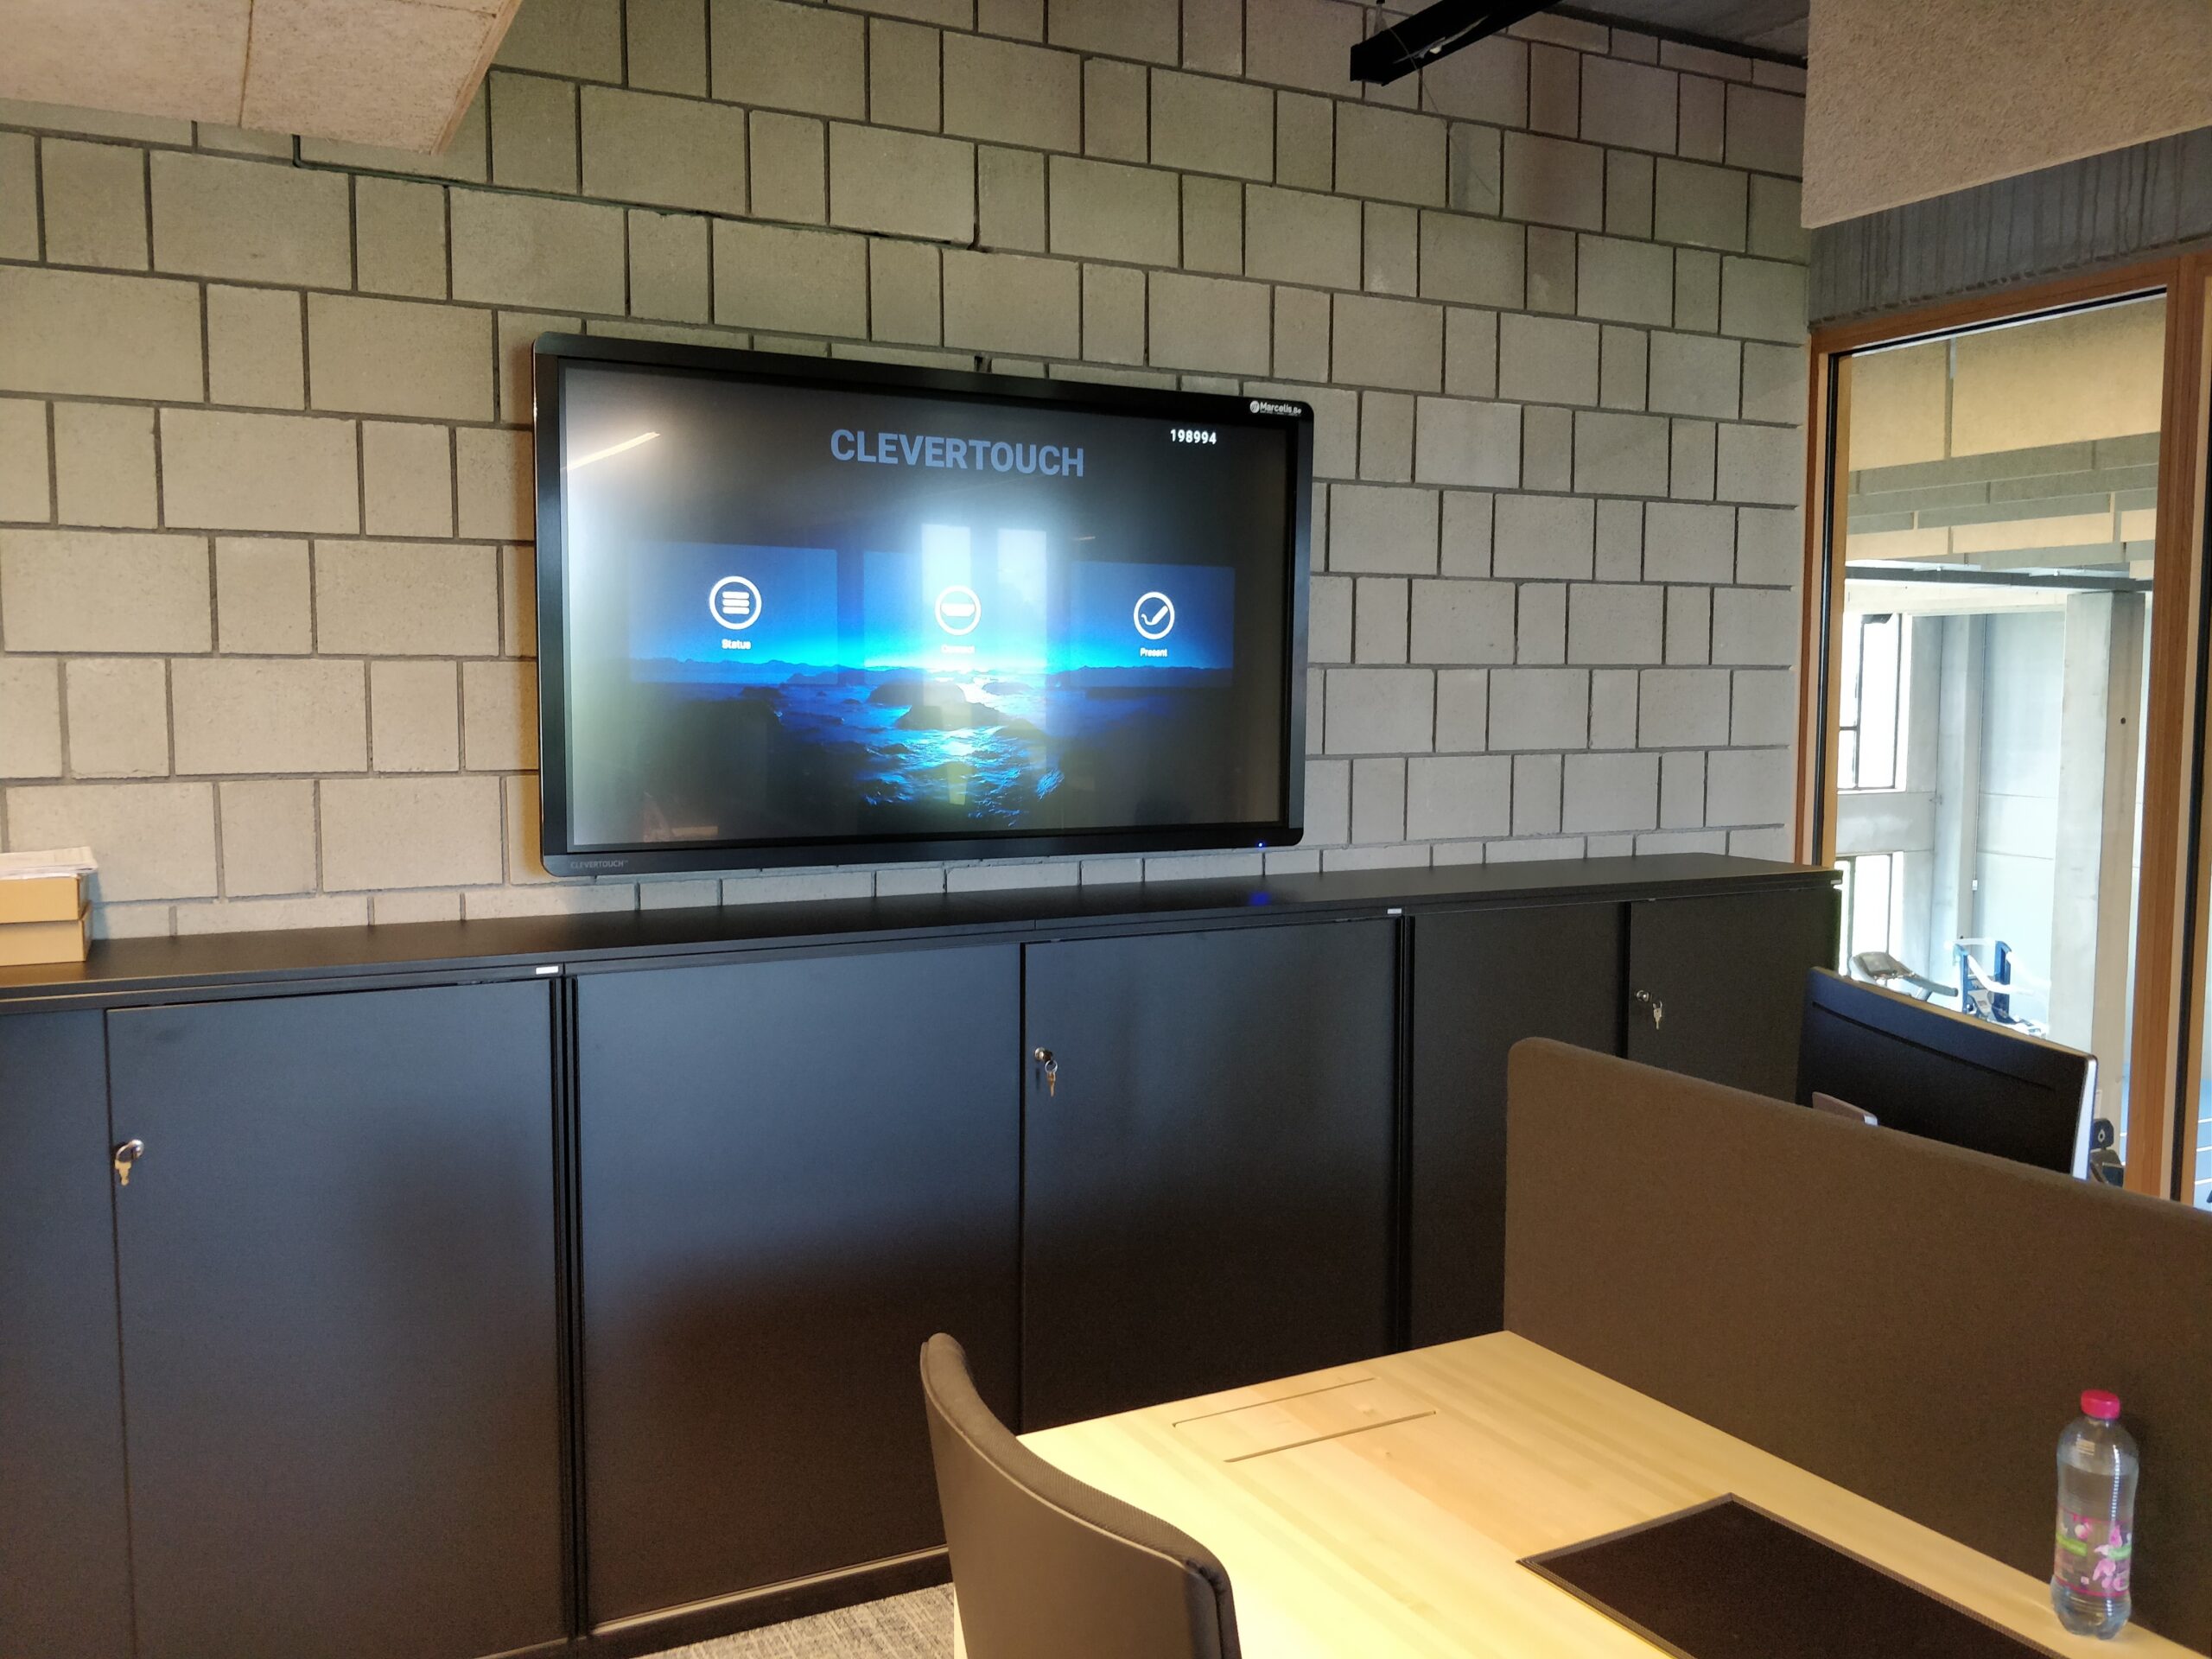 Club Brugge - Marcelis Smart Office - Clevertouch touchscreen - Belgie - Vlaams brabant